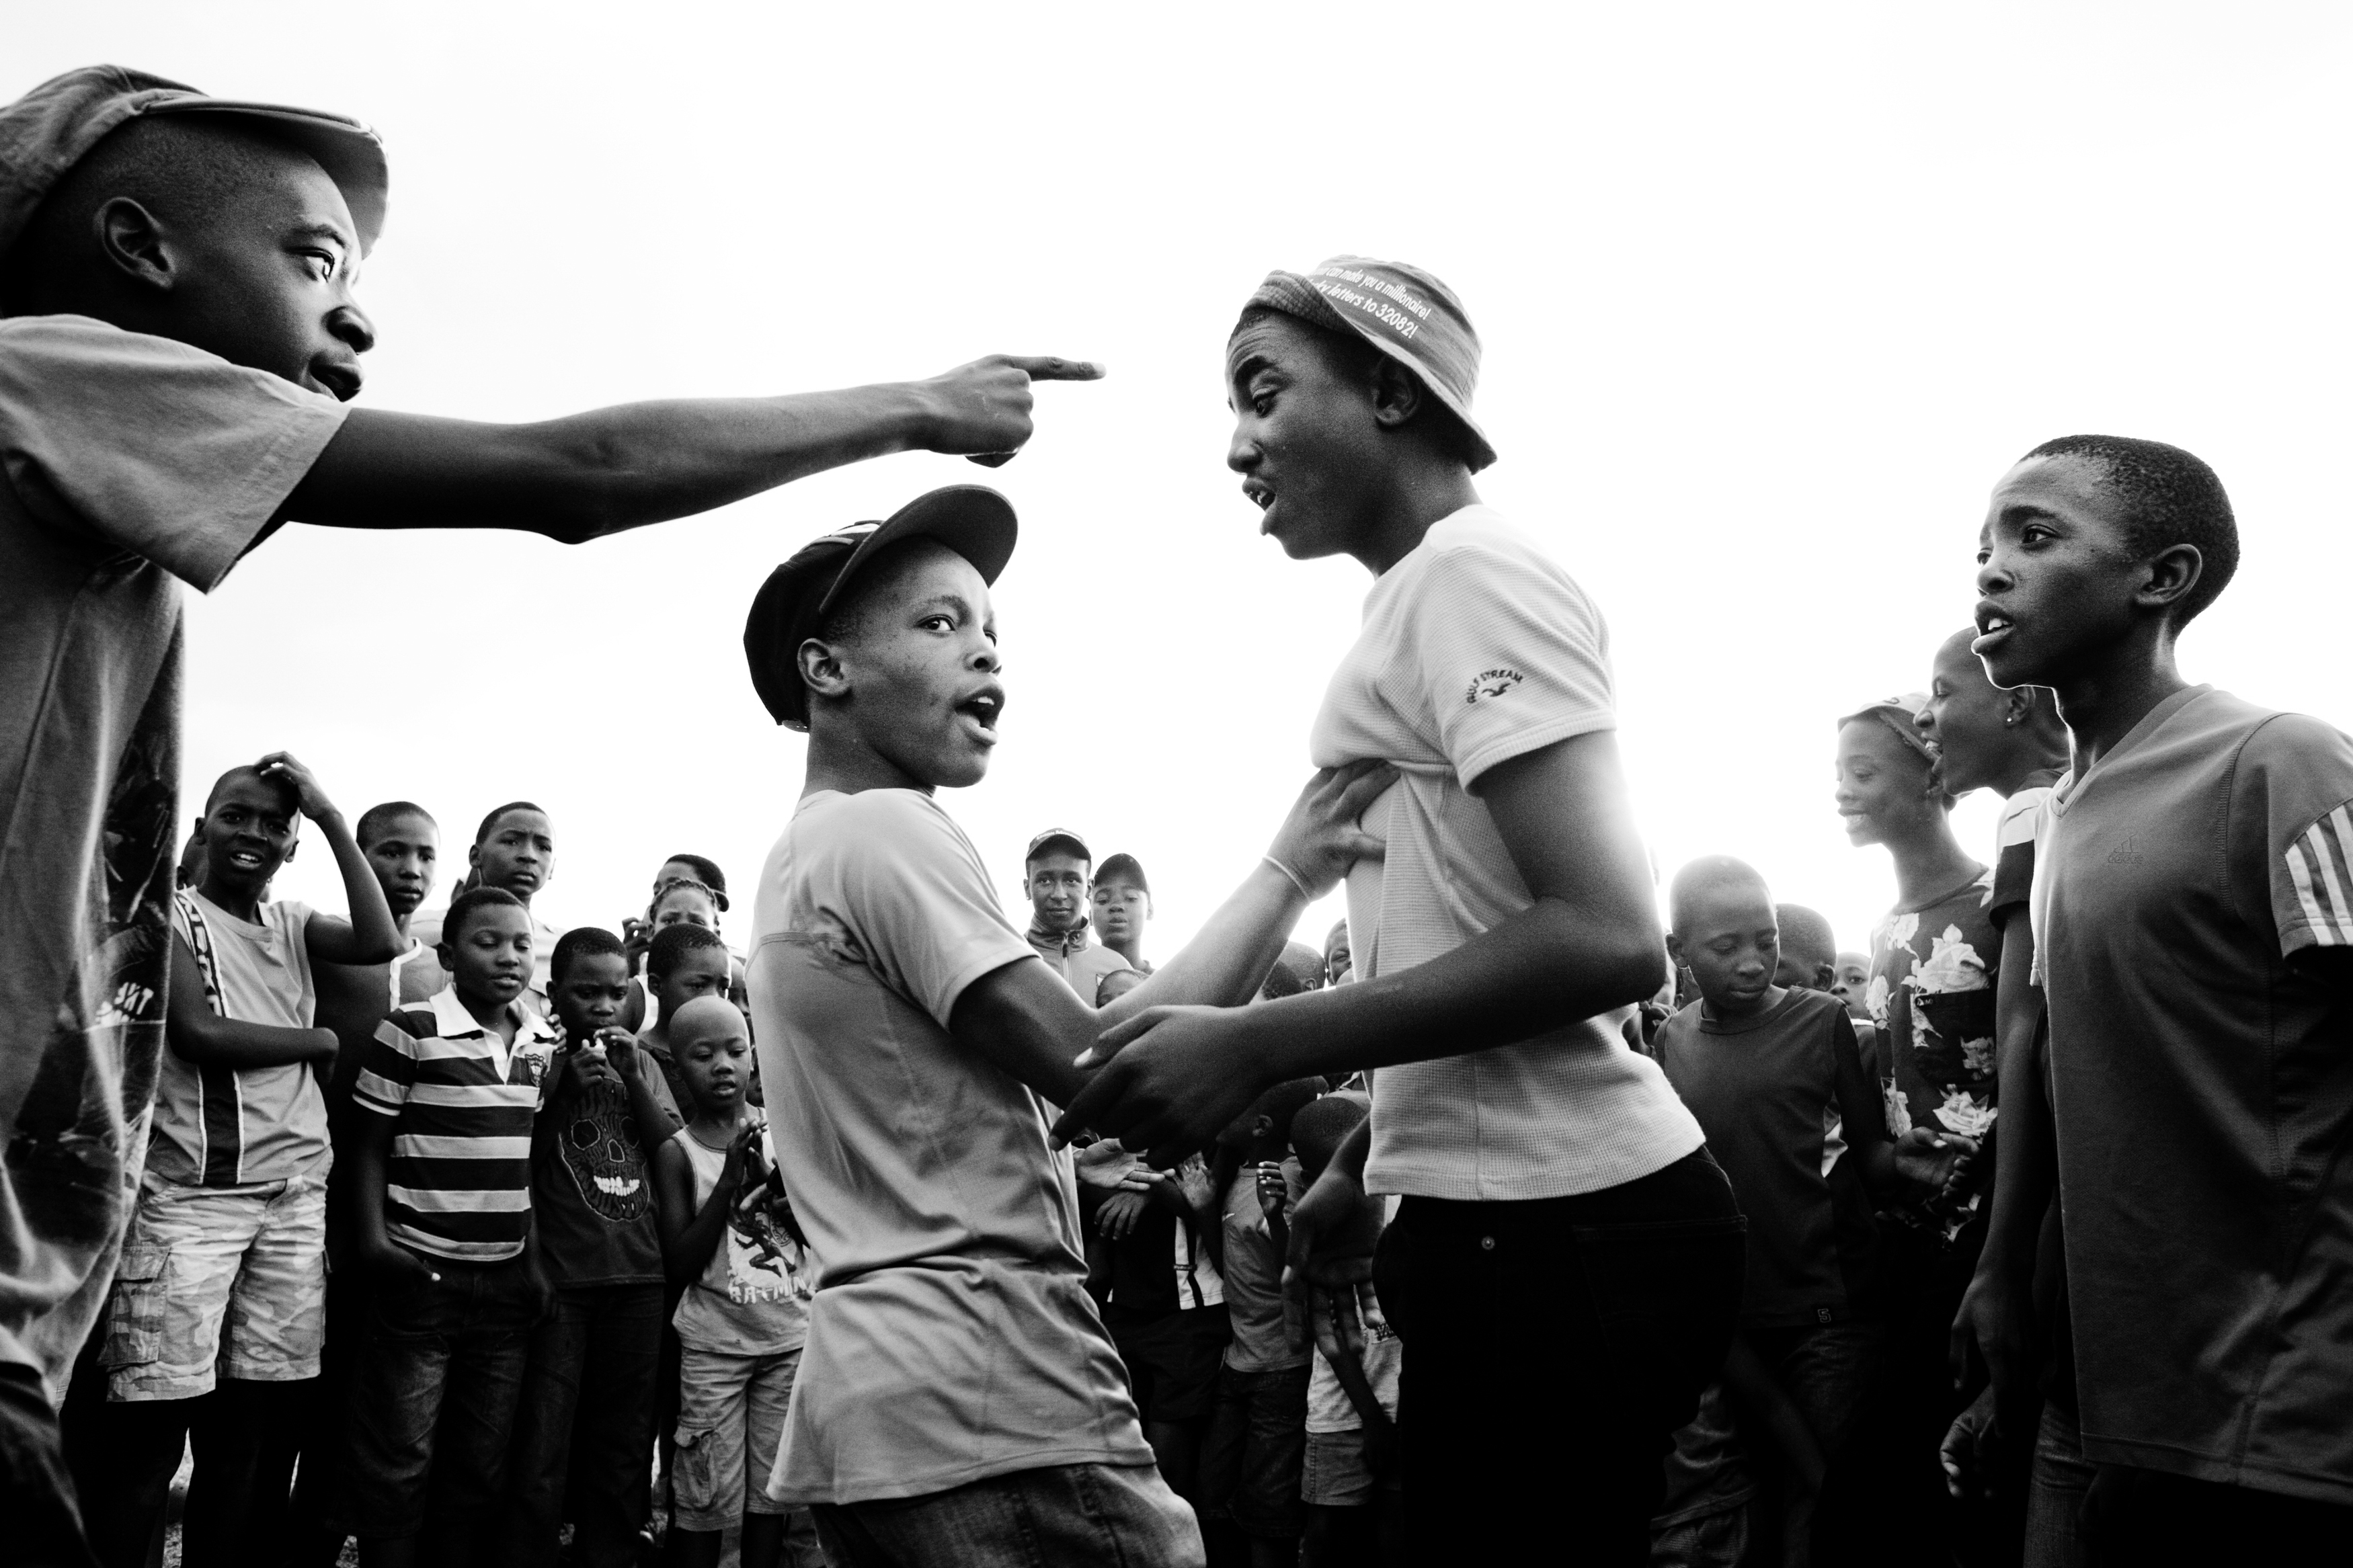 Sibusiso Mgoduka, 16 (far right), watches his friend battle another Izikhothane group in a park near their home in Katlehong, near Johannesburg. Izikhothane is a new subculture among South African youth, in which groups of teen-age boys battle each other in dissing, dancing, and who has the best designer clothing. “Izikhothane is like being a famous guy in Katlehong,” says Mgoduka. “It’s about bragging.”